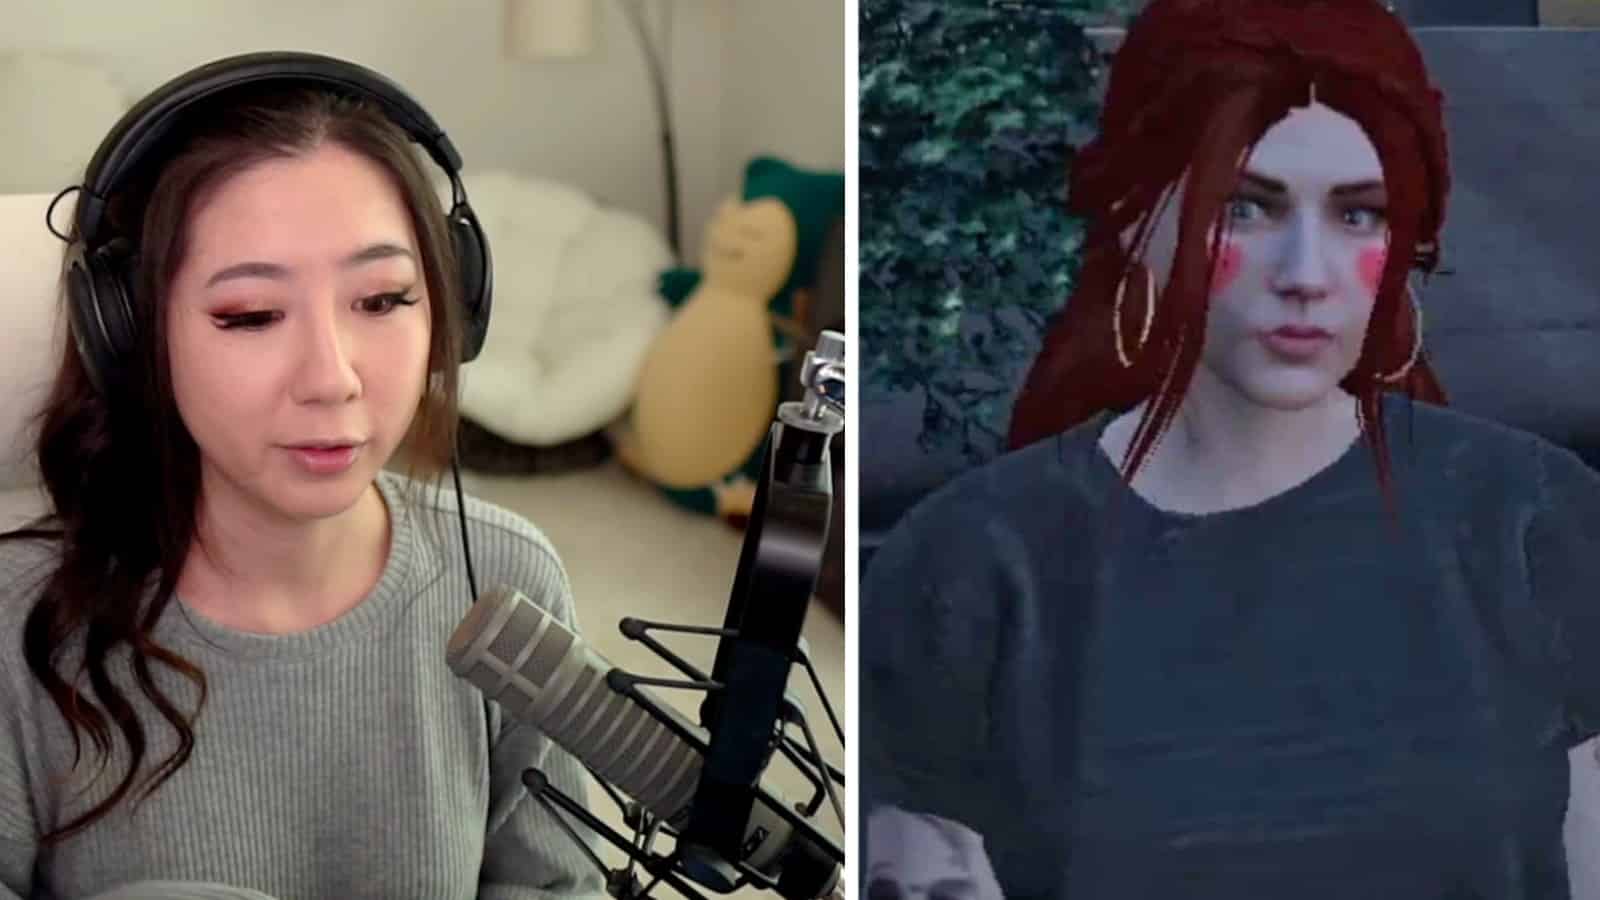 Fuslie and GTA RP character April Foolz